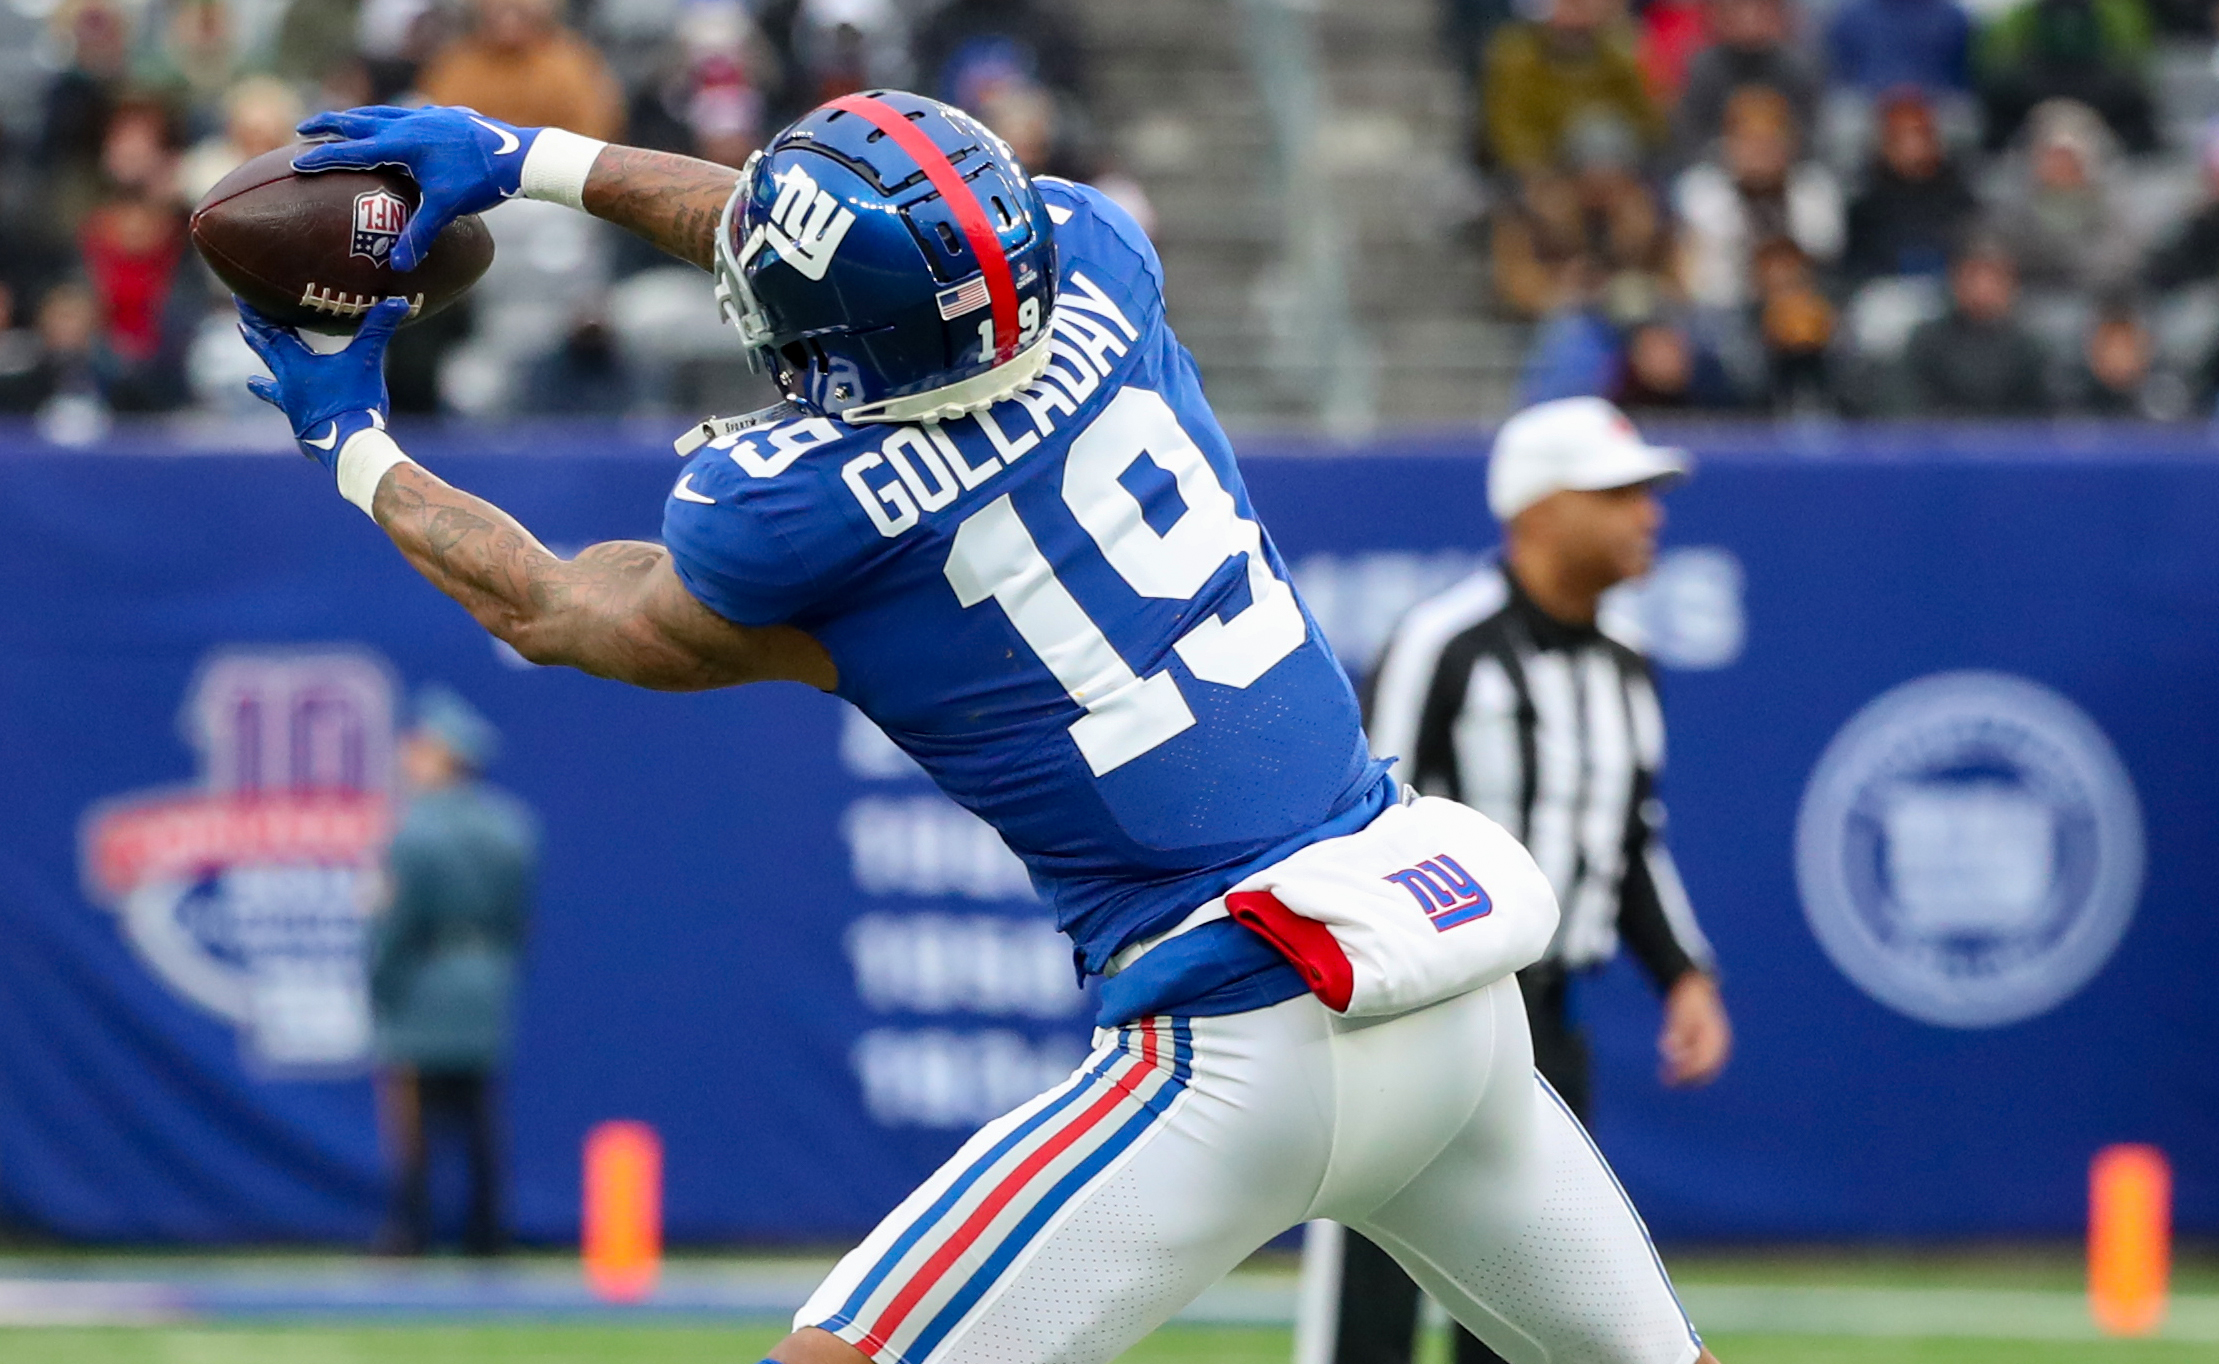 New York Giants wide receiver Kenny Golladay (19) makes a catch for a first down during the fourth quarter on Sunday, Jan. 9, 2022 in East Rutherford, N.J. The Washington Football Team won, 22-7. Golladay finished the season without a touchdown reception.